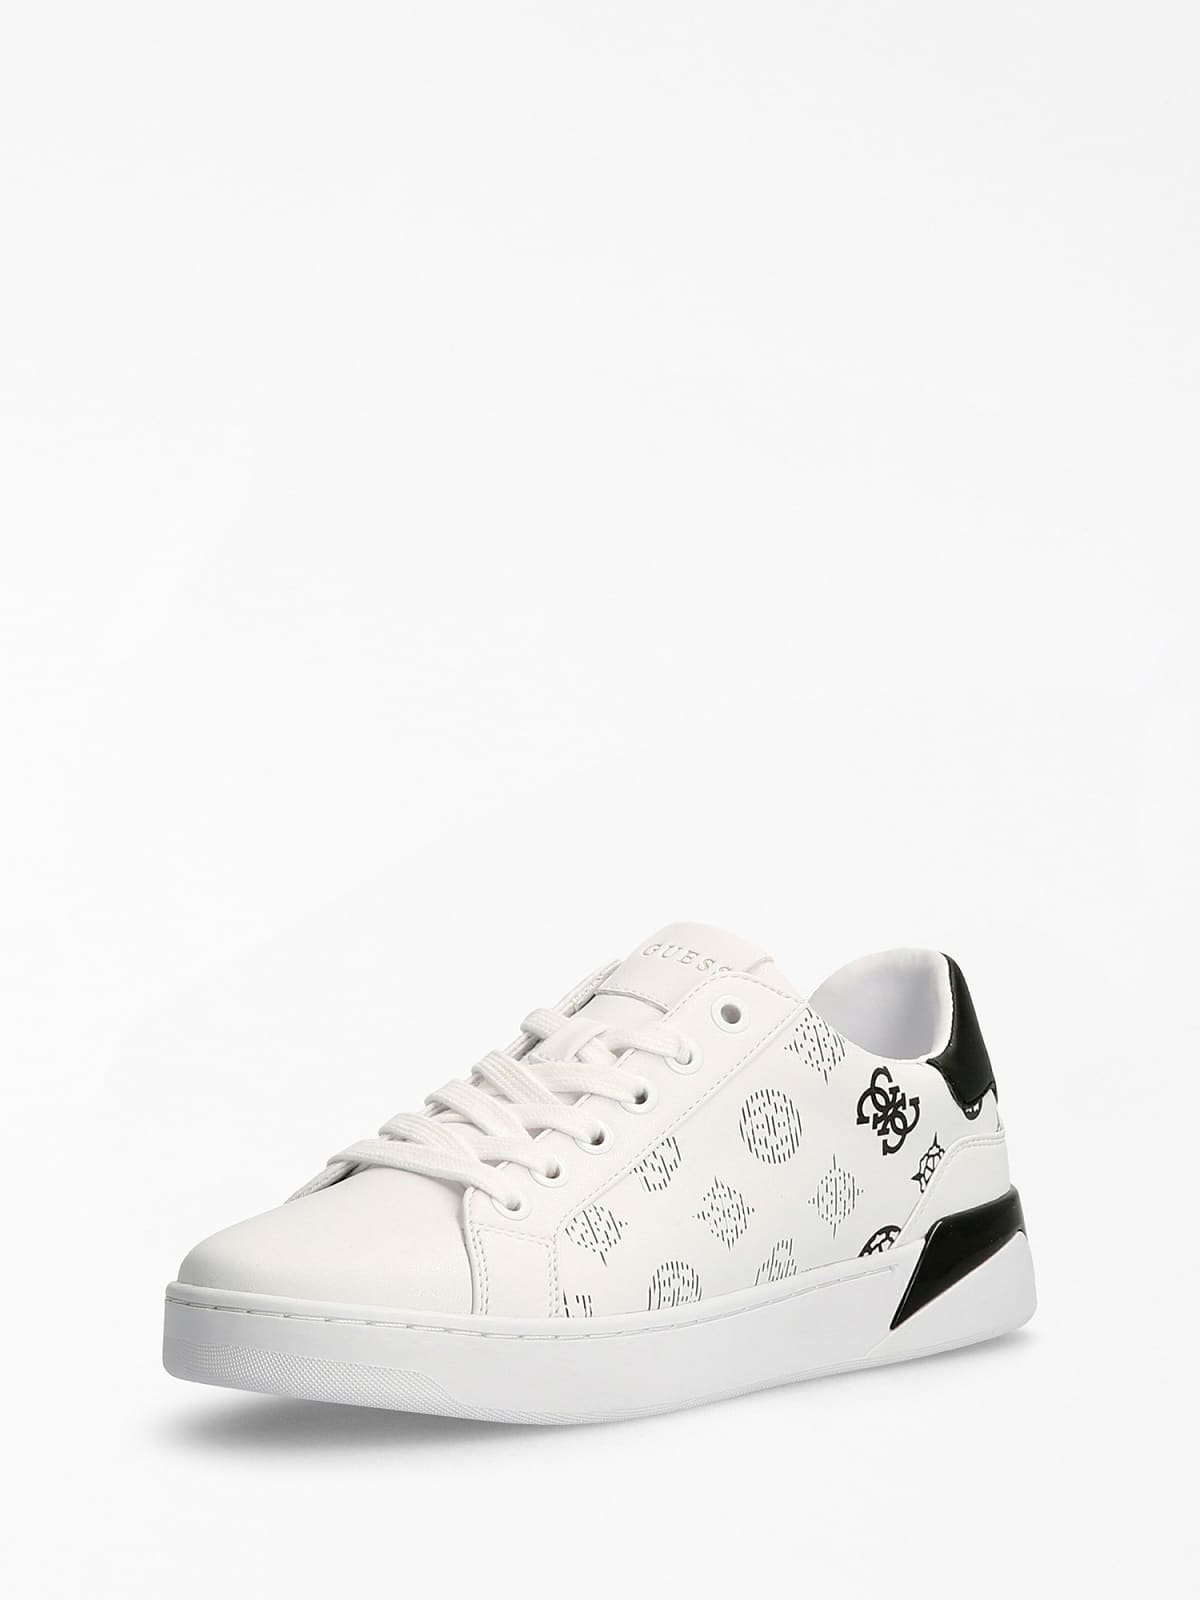 Guess Refresh 4G Peony Logo Sneaker | Rather Saucy